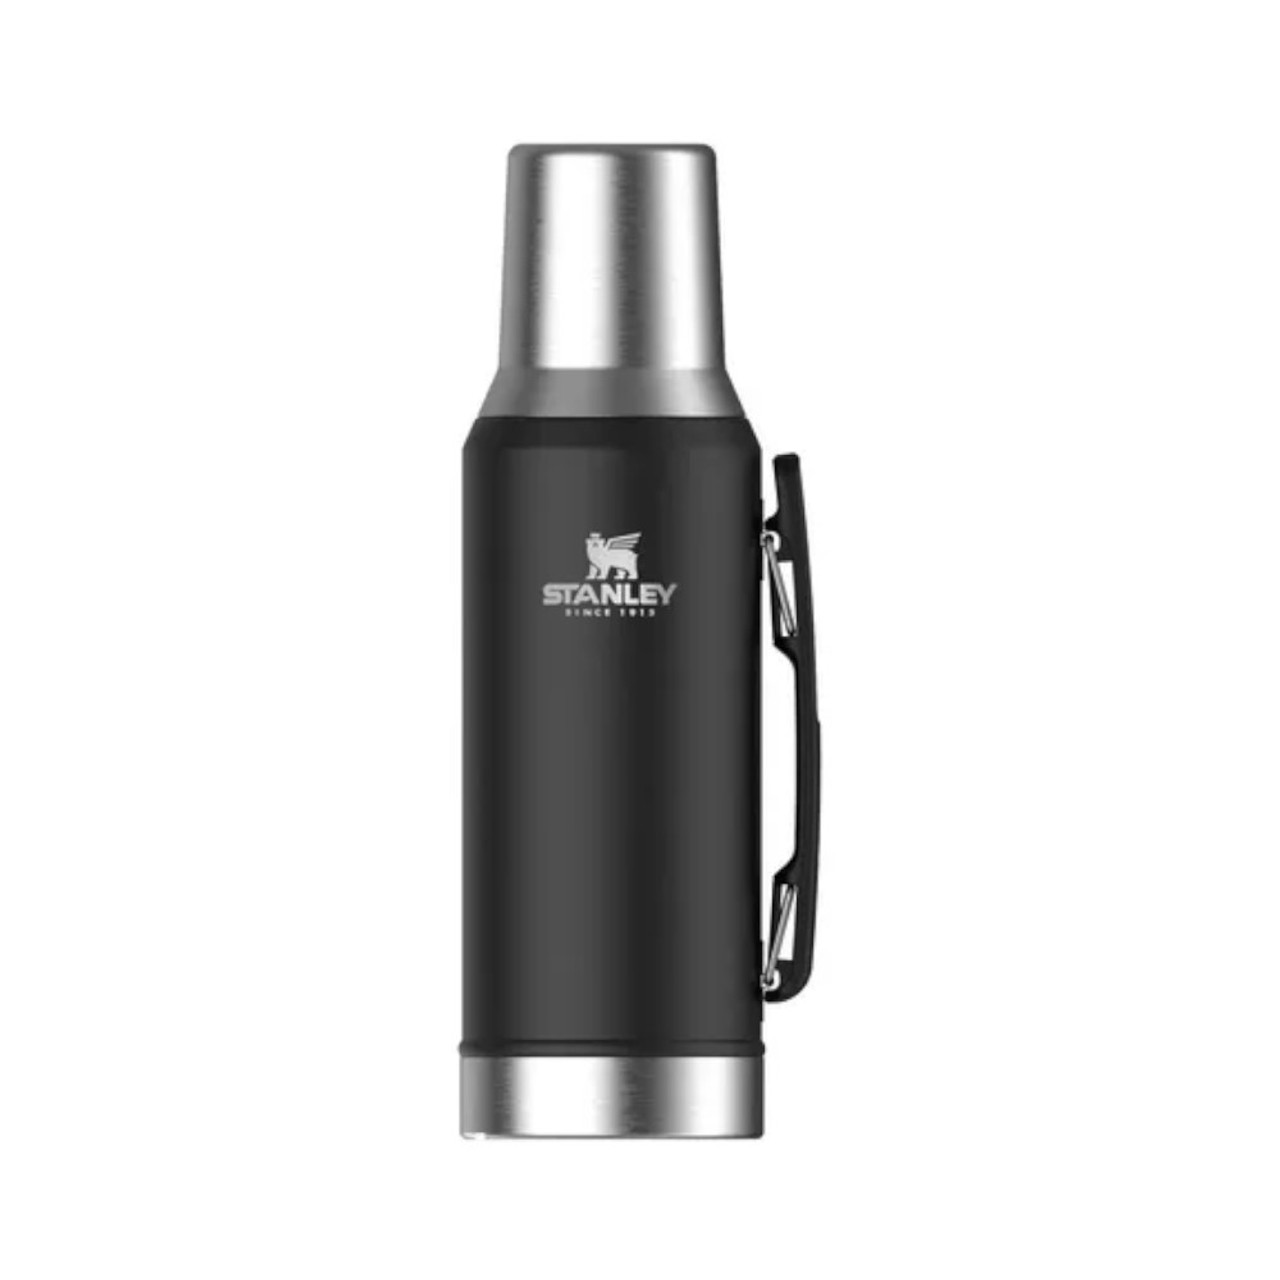 Stanley 1.2 L Mate System Thermos - Perfect Brew Original - Stainless Steel